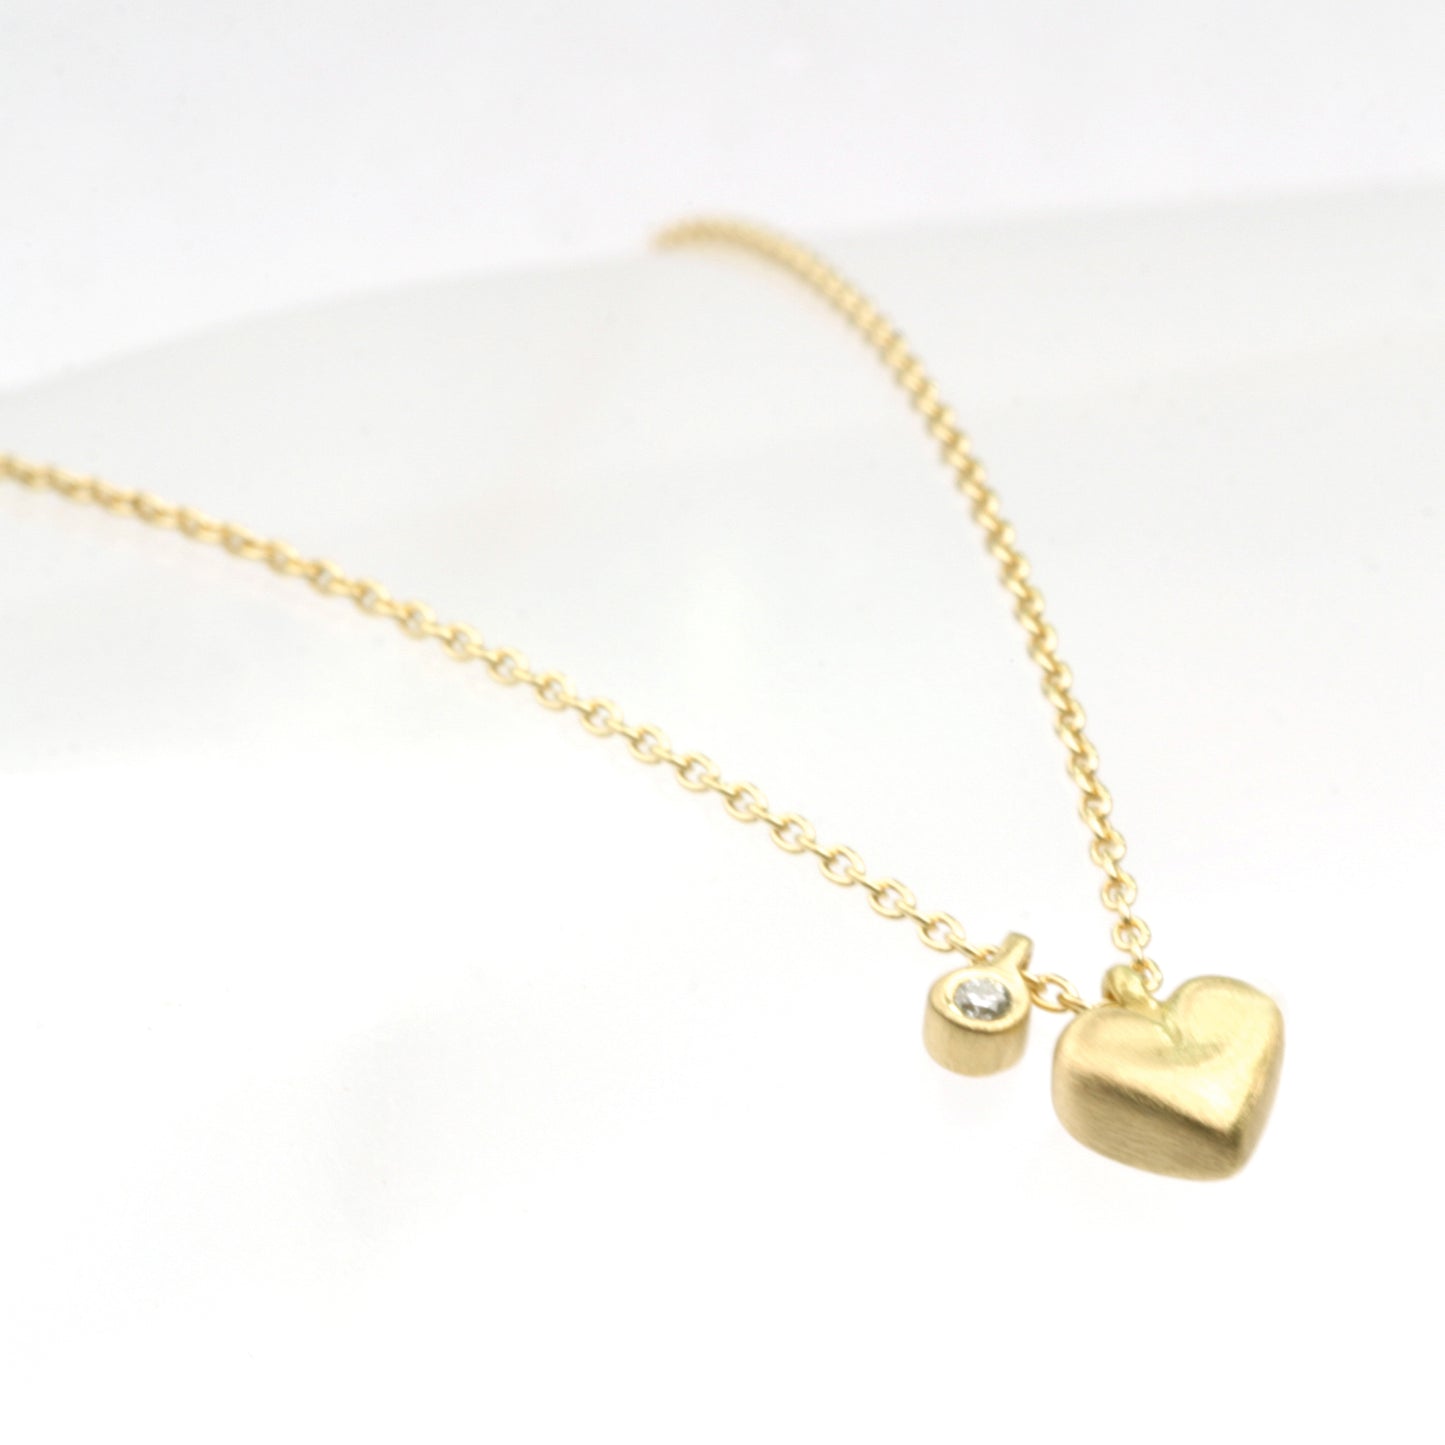 Micro Heart with diamond tag on cable chain